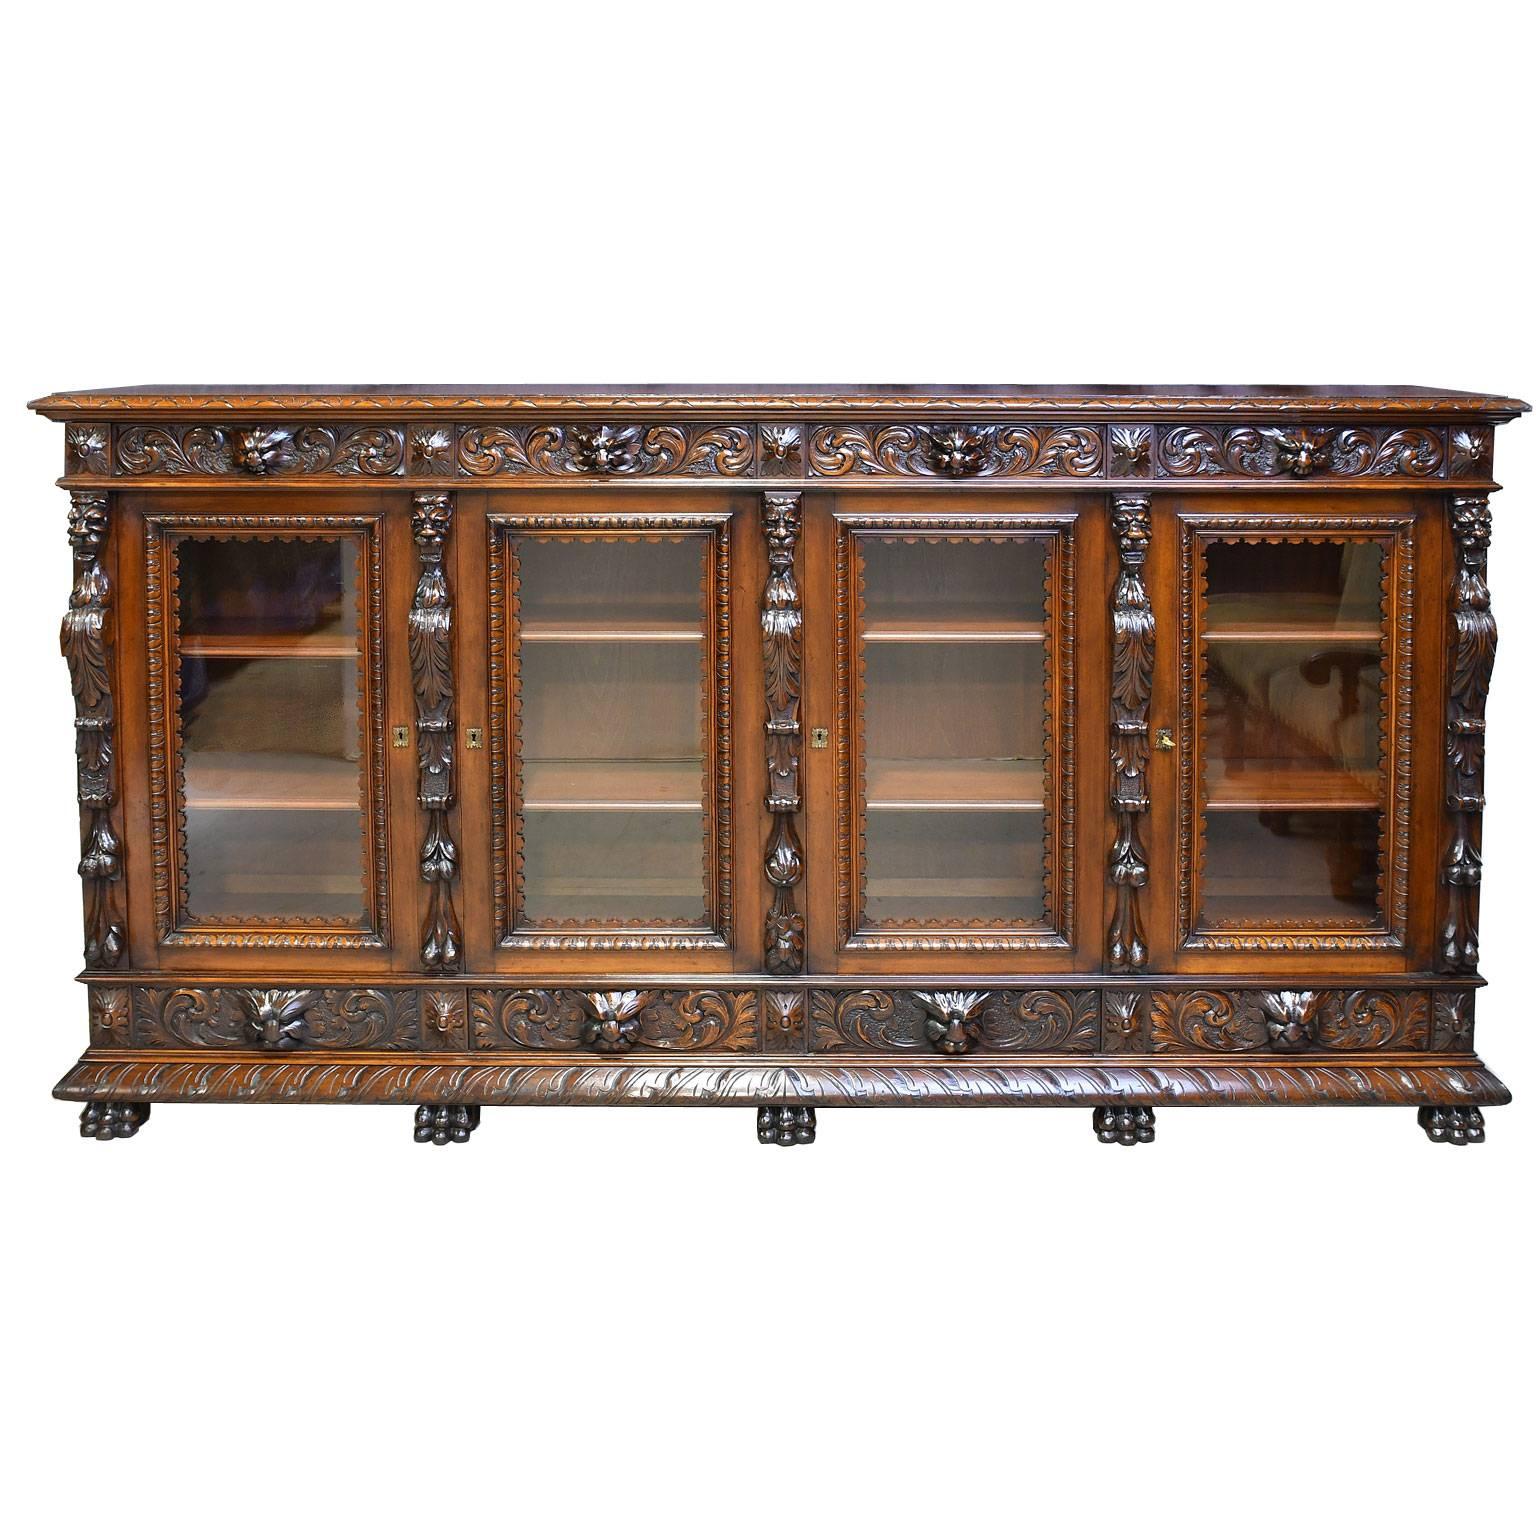 An exquisite bookcase or vitrine in the style of Henri II (Renaissance) in a very fine quality French walnut with well-articulated carvings in high relief of acanthus foliage & rosettes, intermingled with carvings of grotesques in the arabesques, in